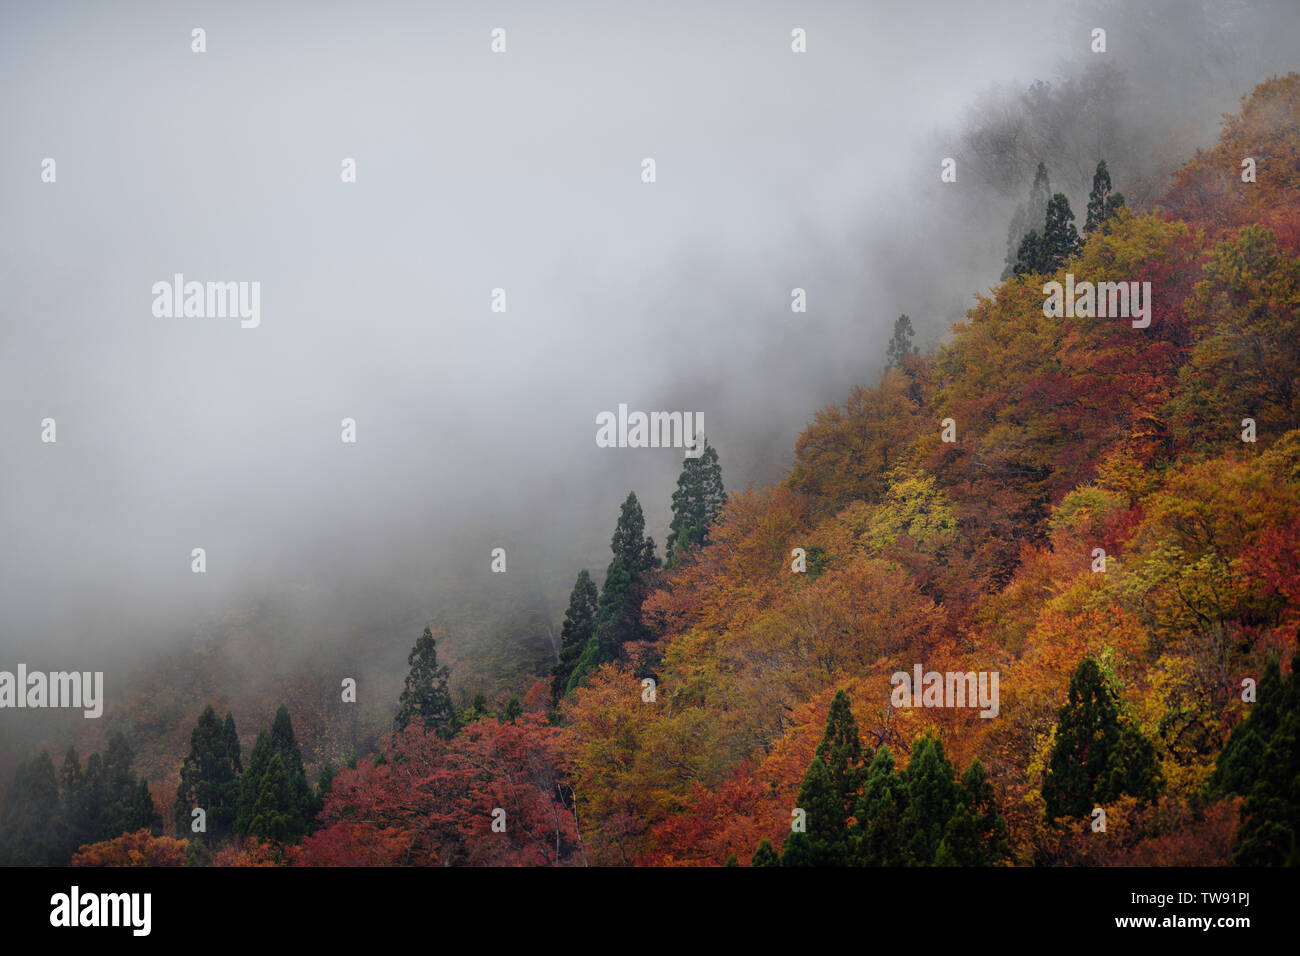 Mountain forest covered in red autumn trees partially hidden by the morning fog, beautiful abstract nature scenery. Ainokura, Toyama, Japan. Stock Photo